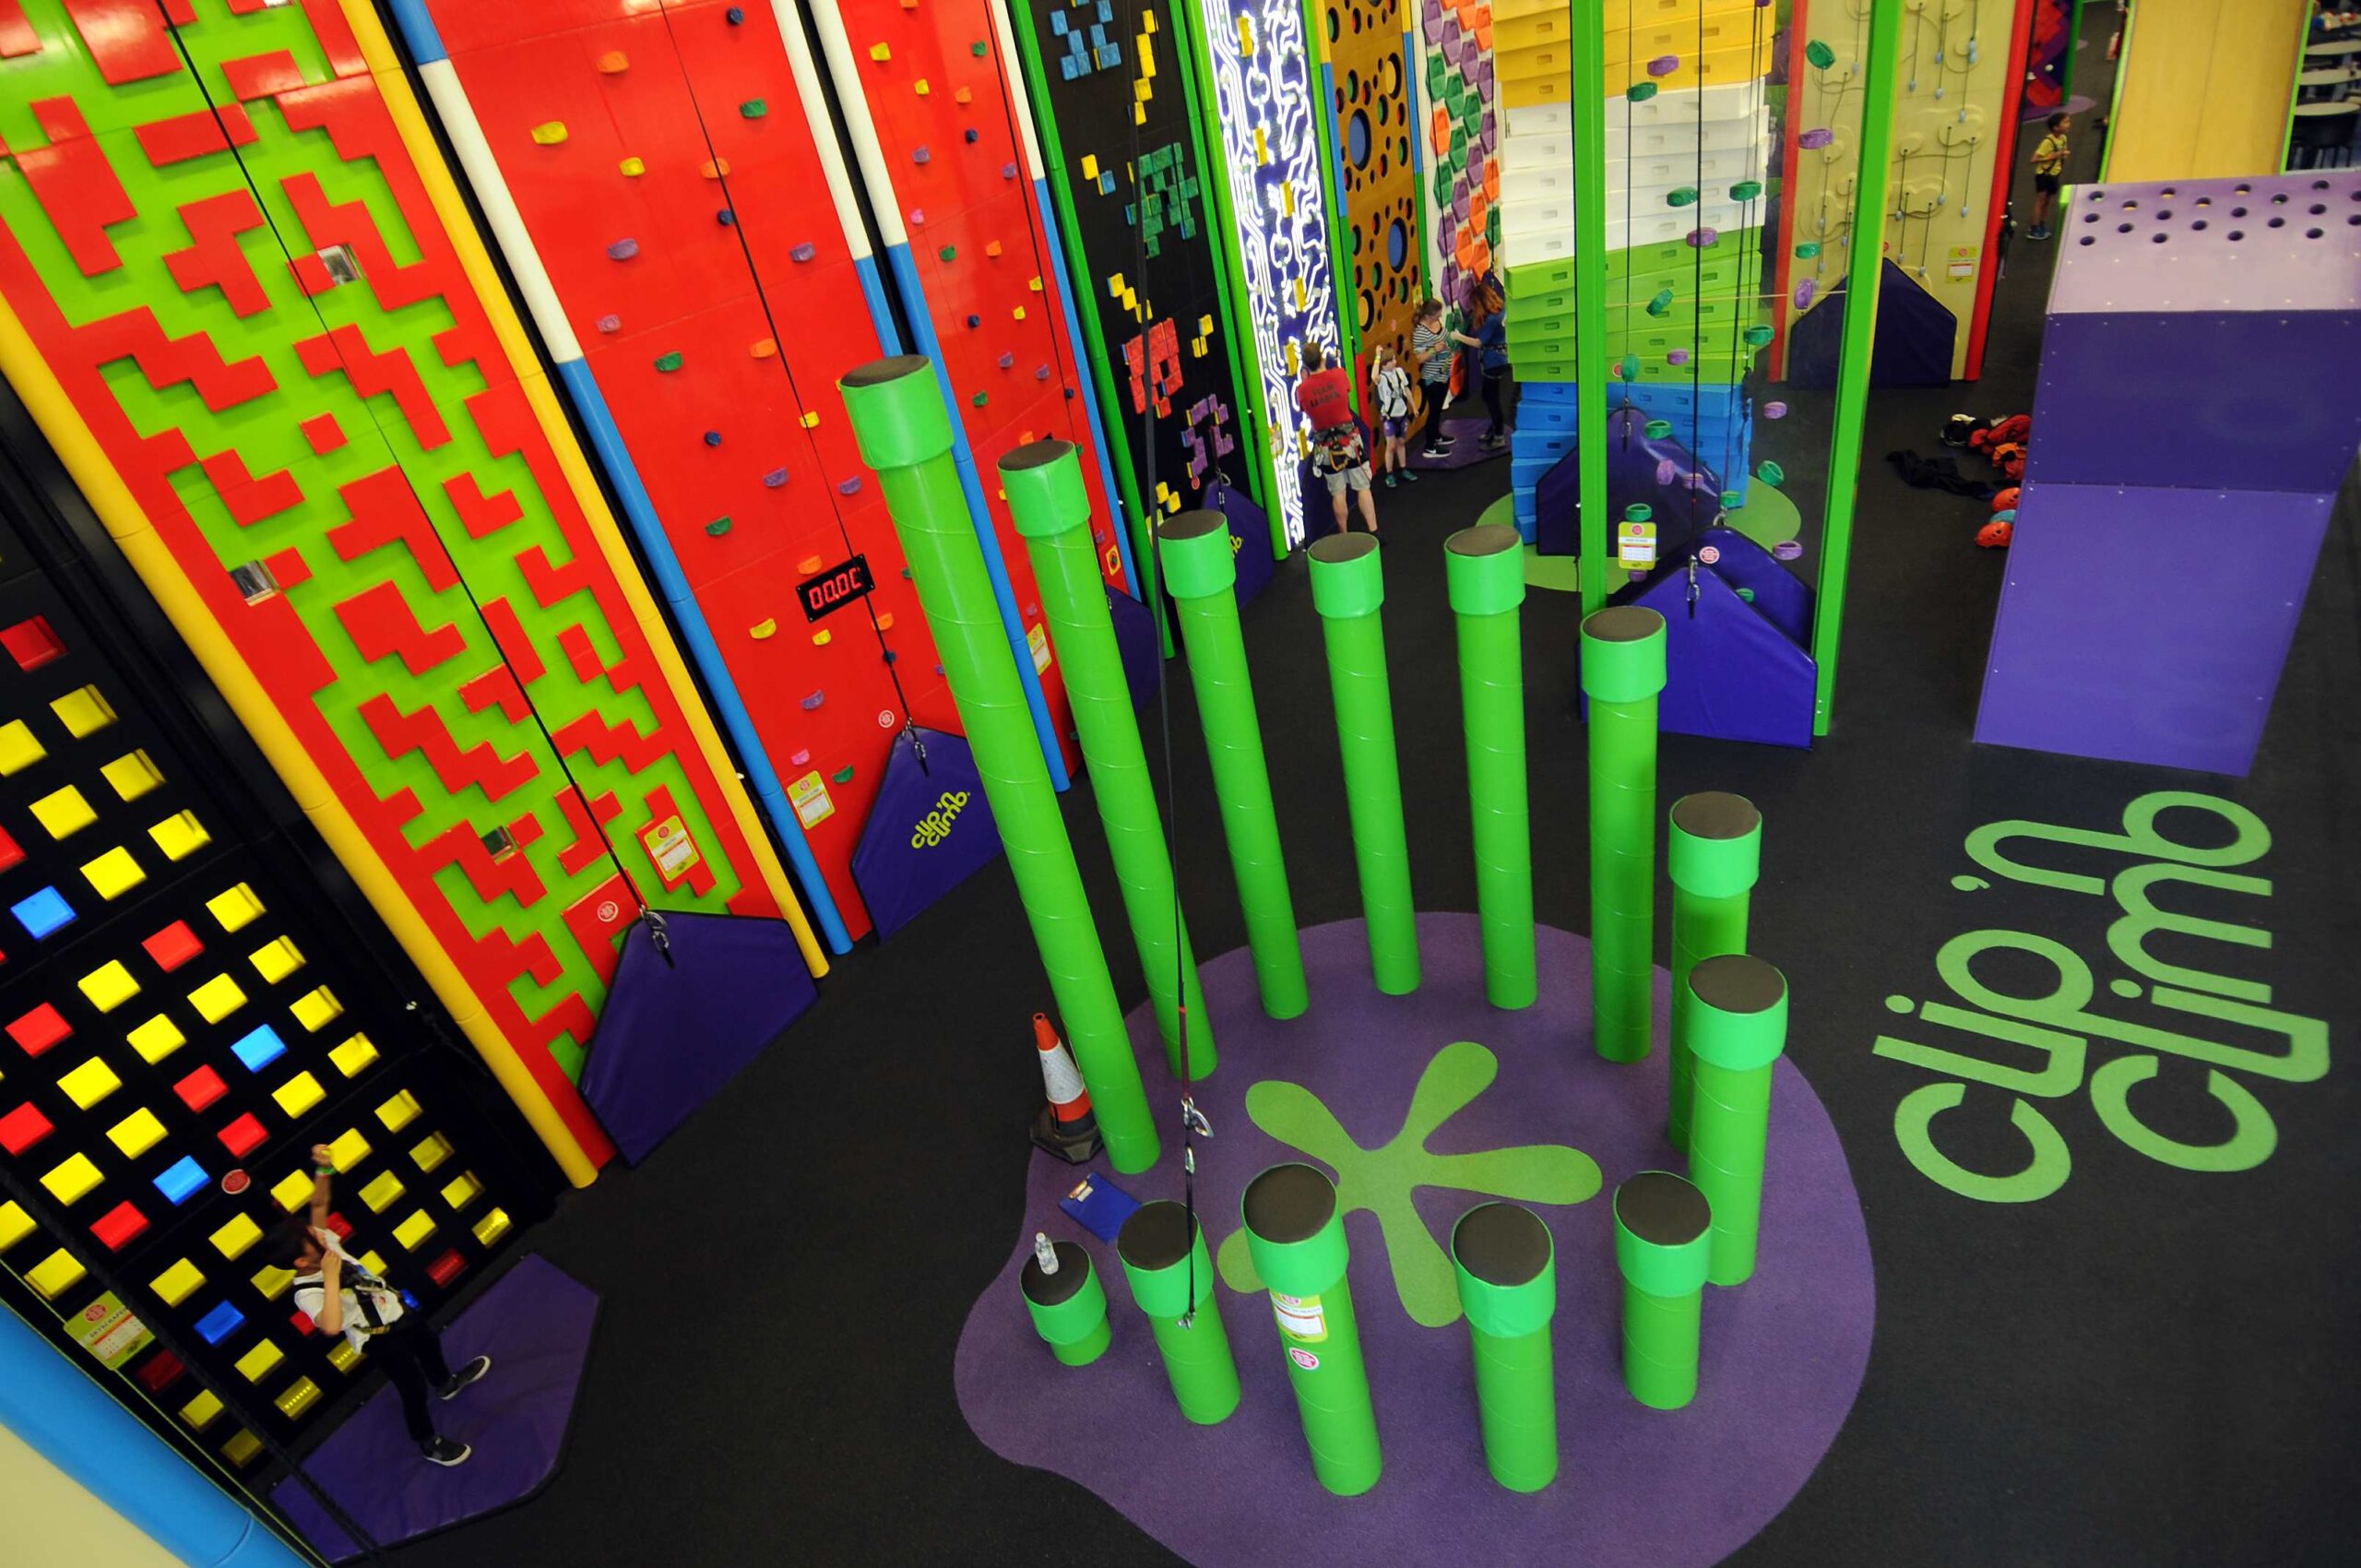 We took a Sneak Peek at Wales' First Independent Clip 'n Climb